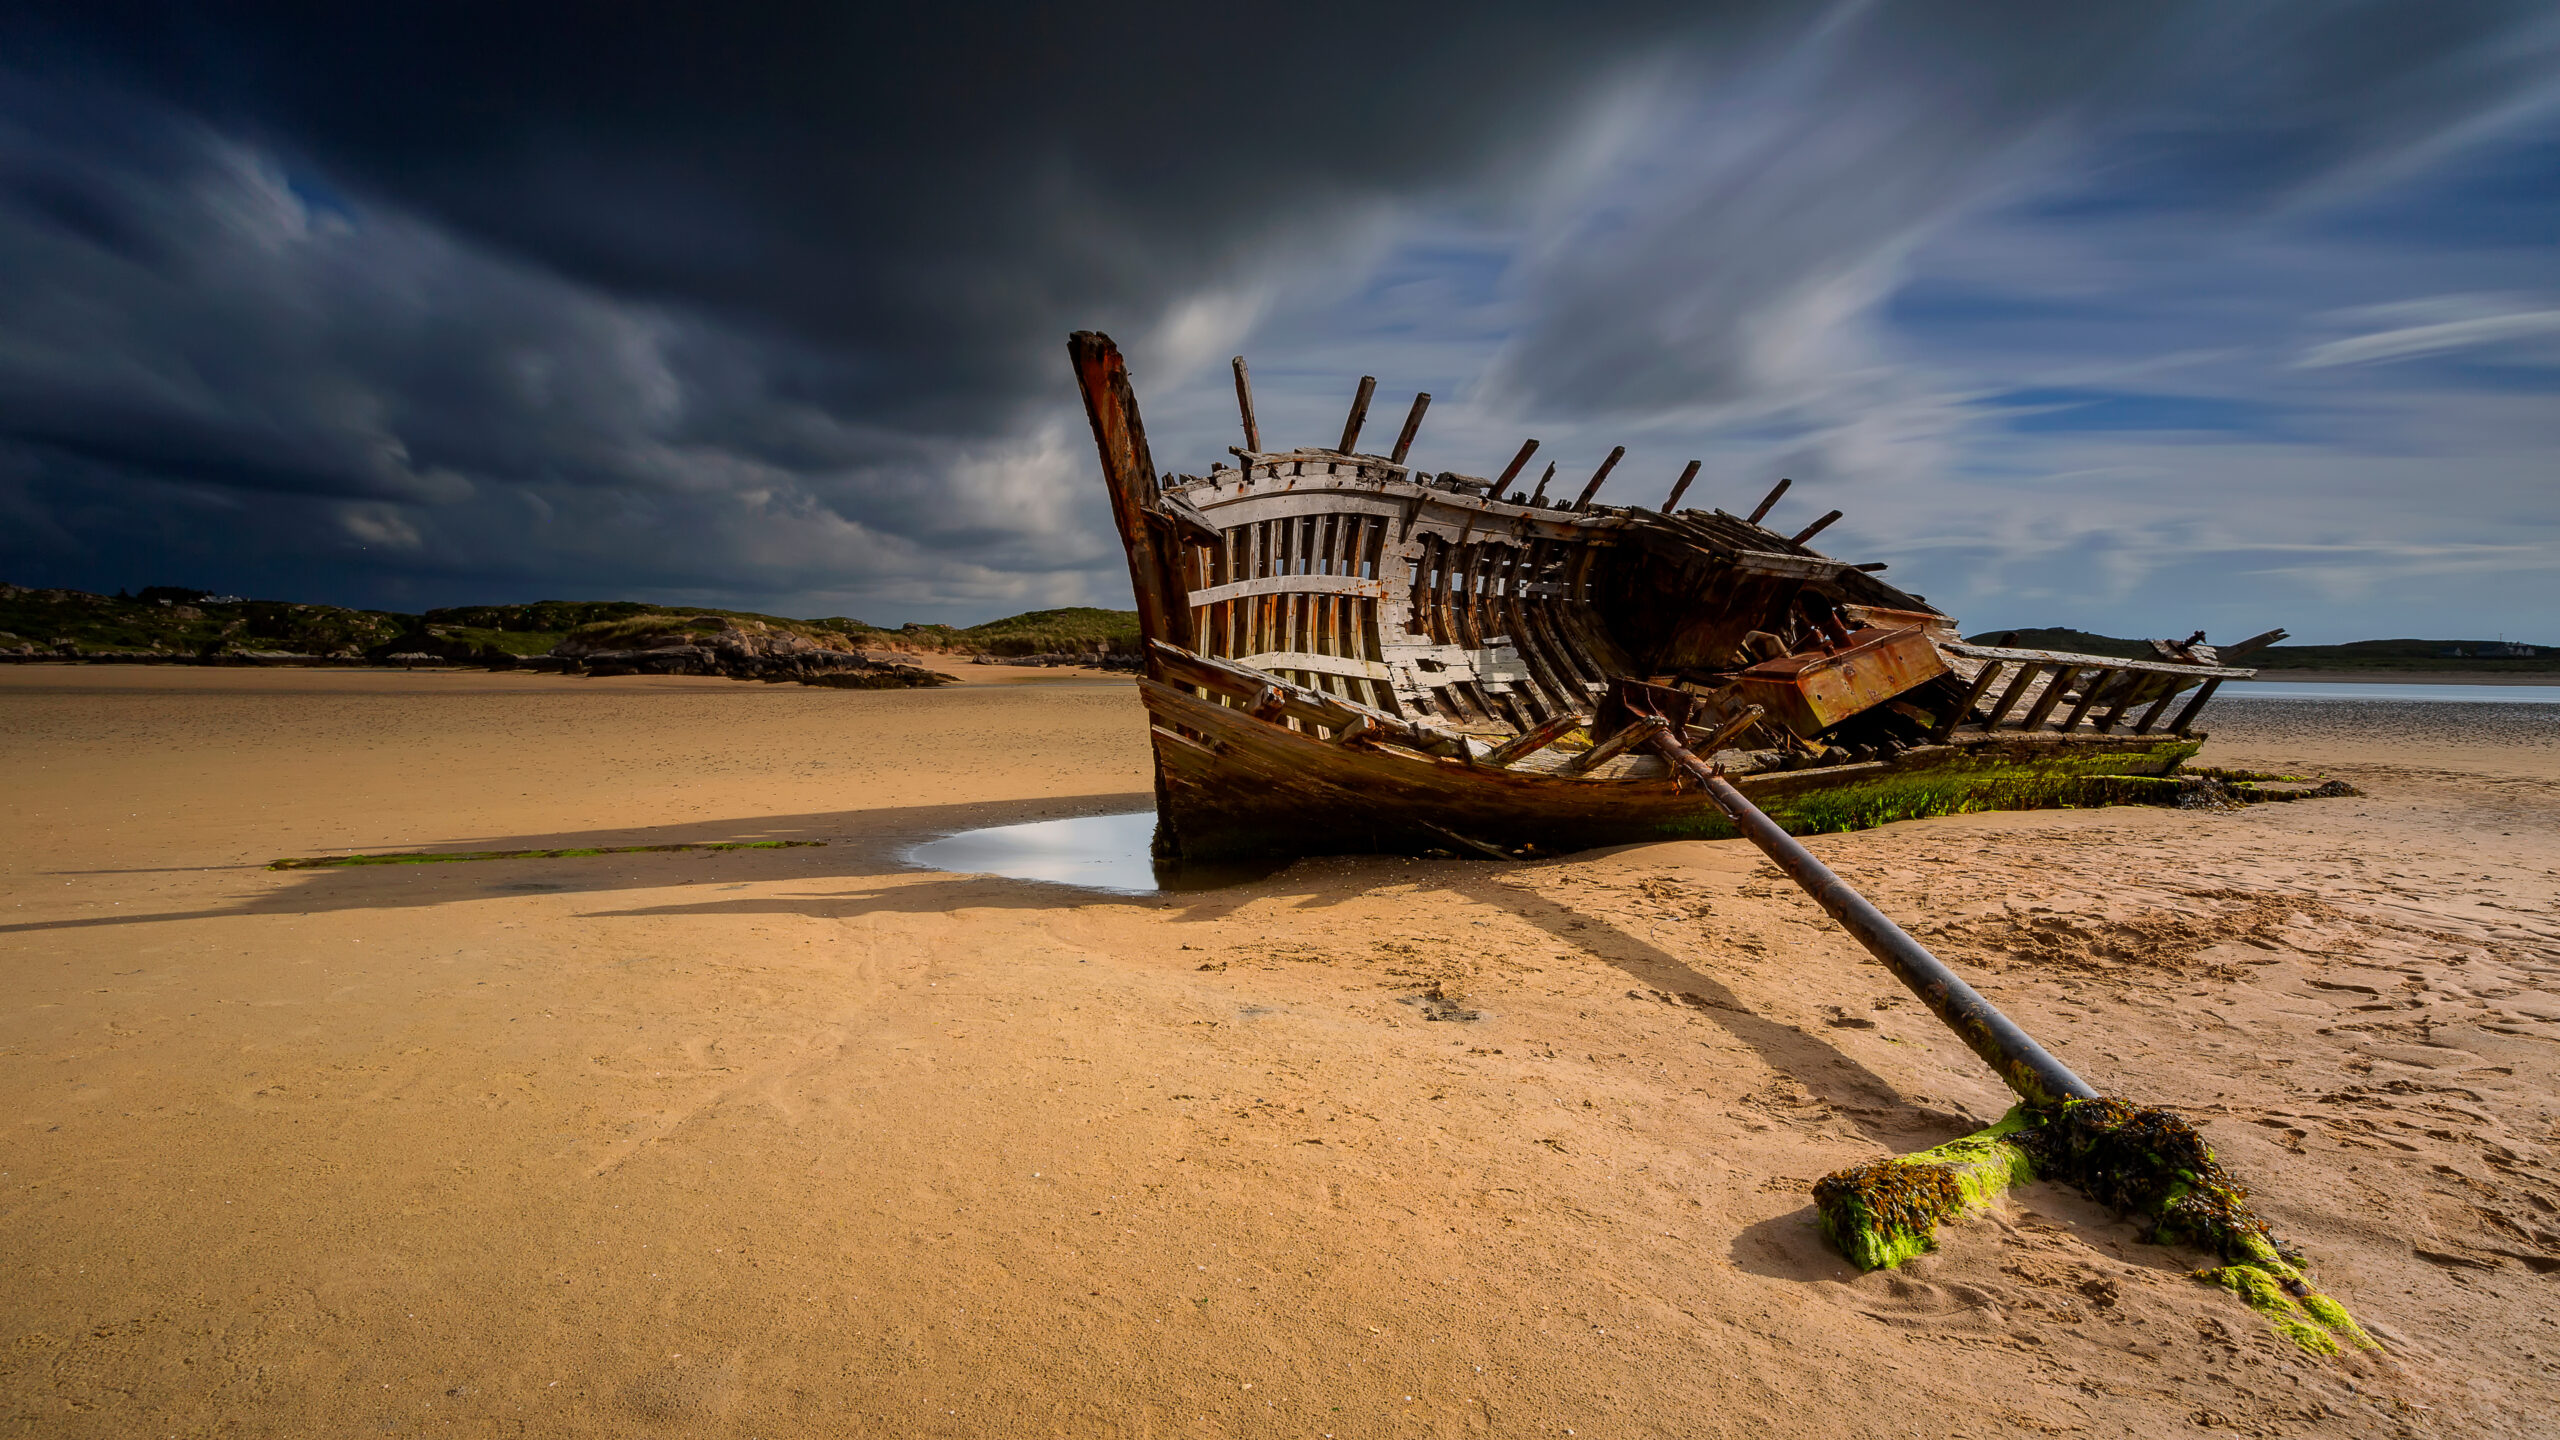 this picturesque shipwreck in Donegal makes a perfect photo op